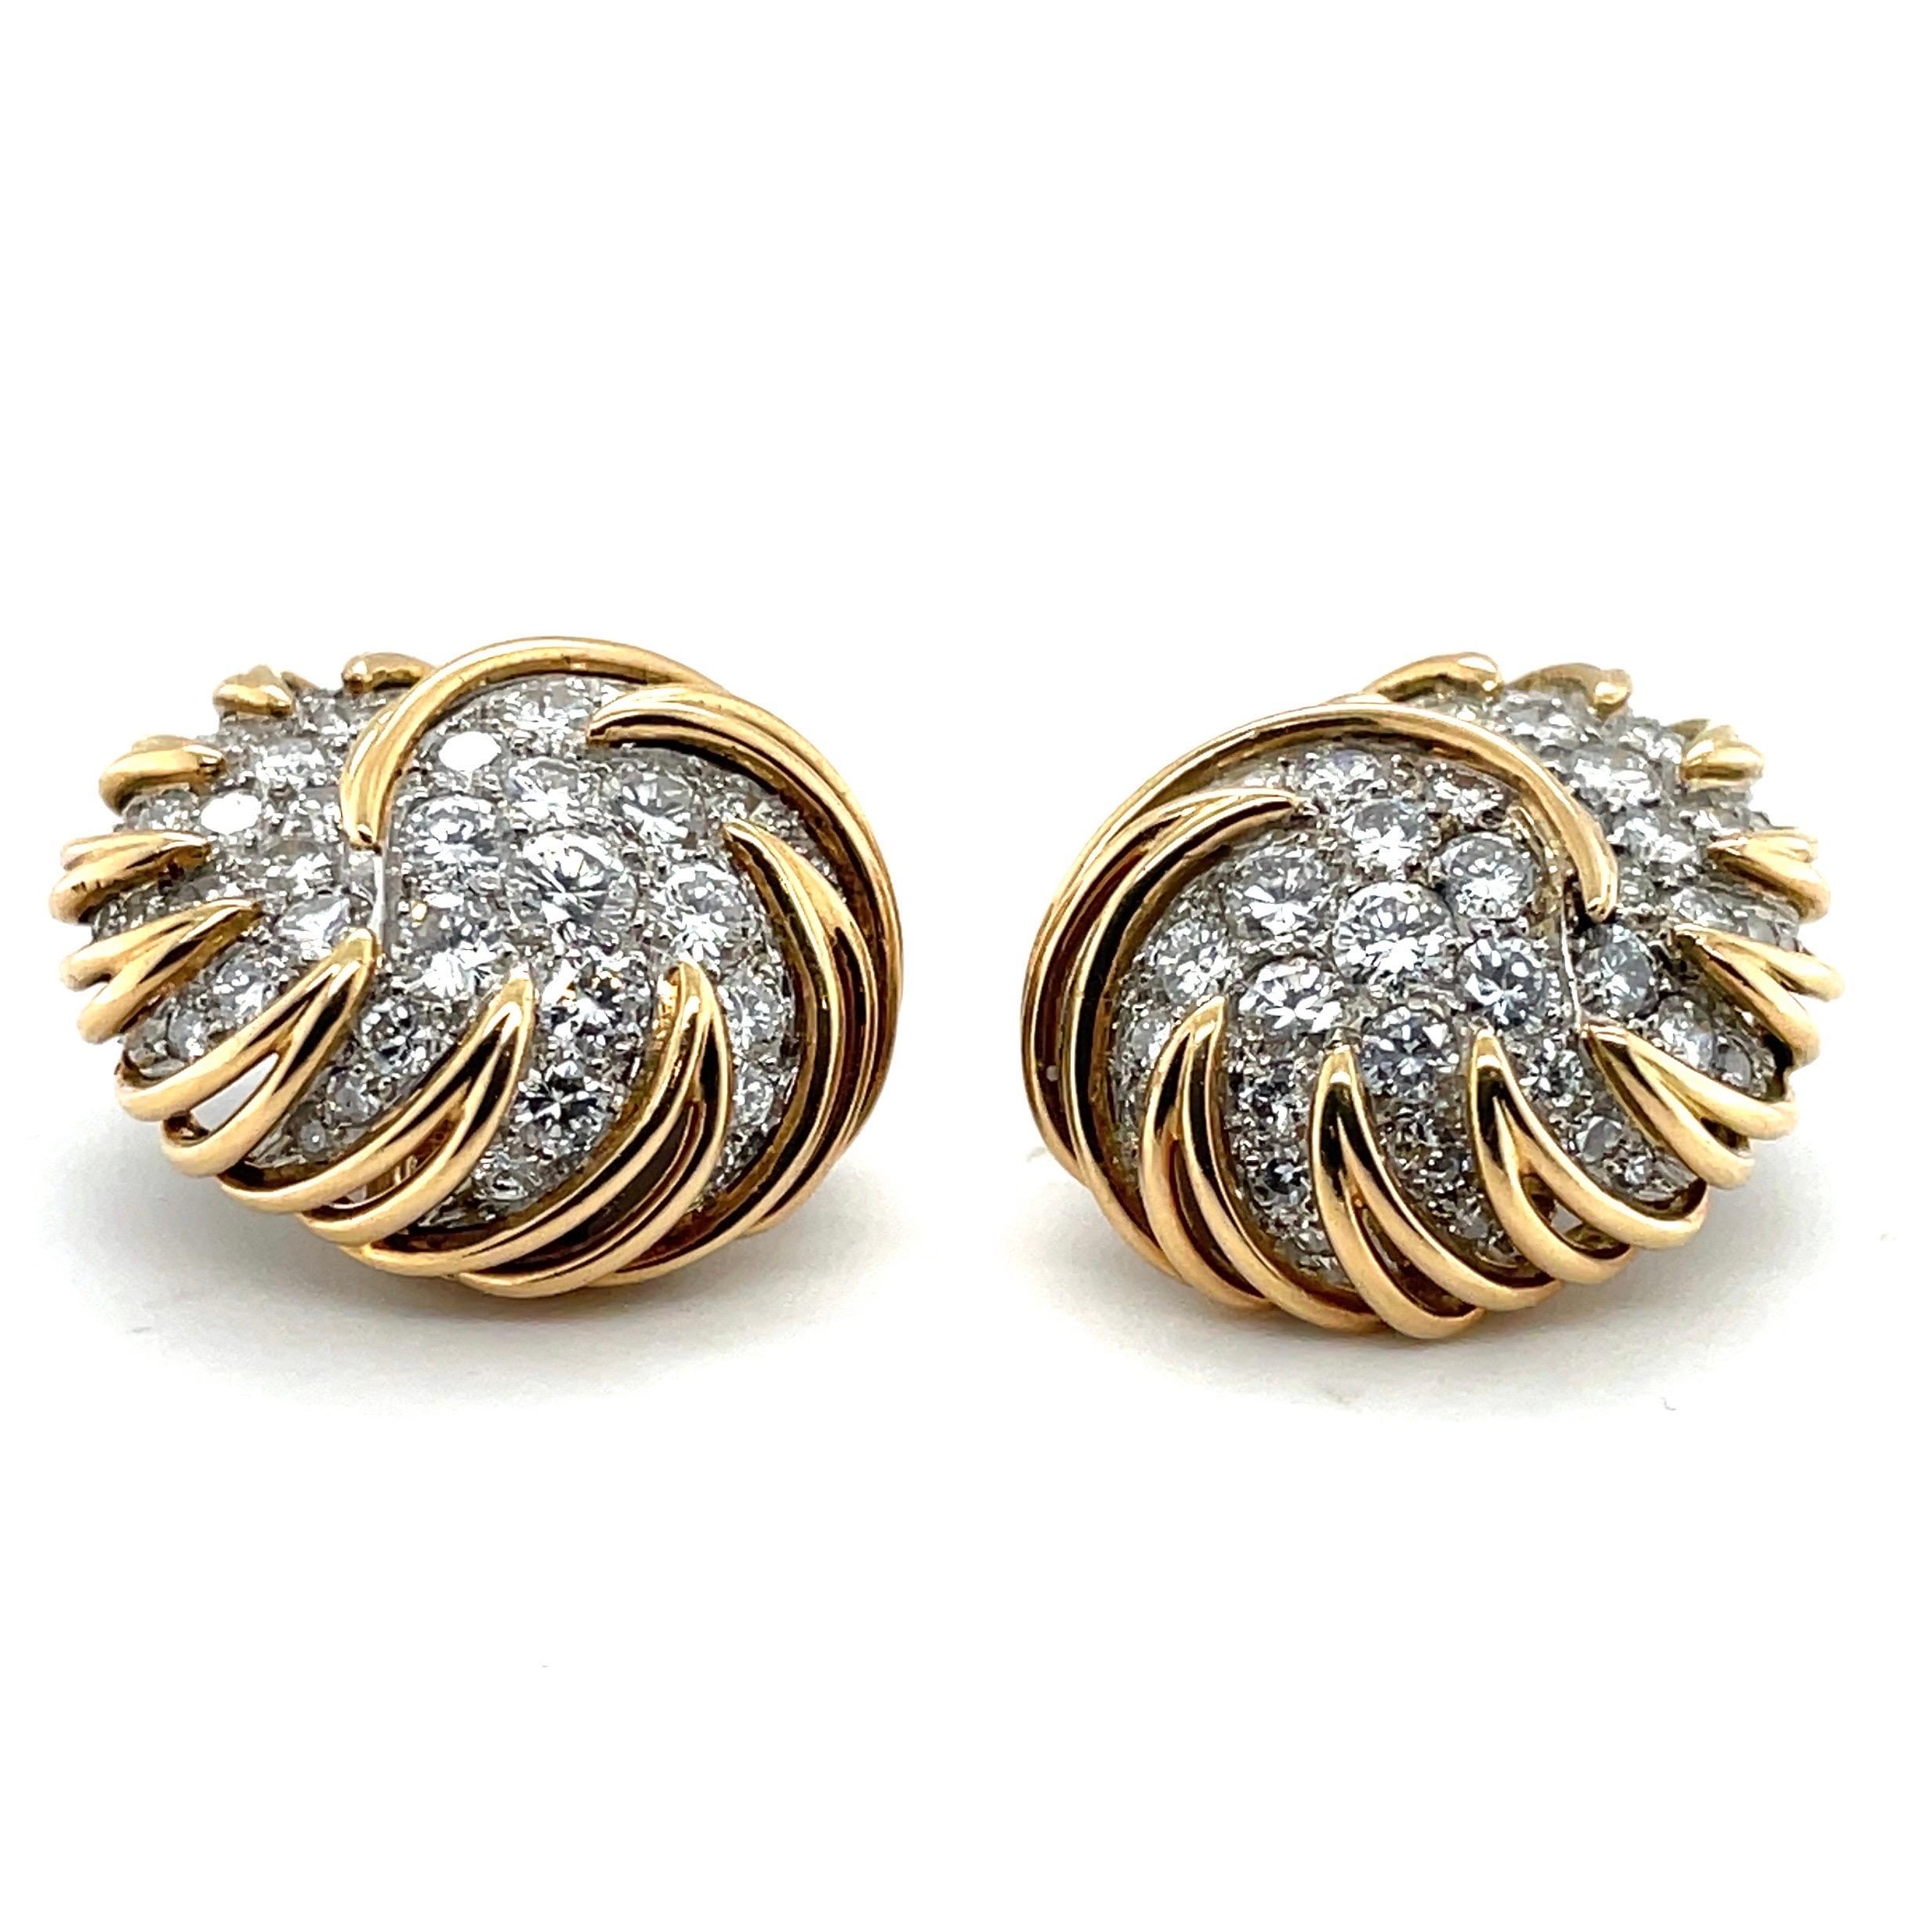 Charming 18 karat yellow gold and platinum diamond earclips, France, circa 1950s. 

Delightful earclips of slightly bombé, scroll design, each pavé-set with brilliant- and single-cut diamonds totalling circa 5.5 carats, within a platinum and 18